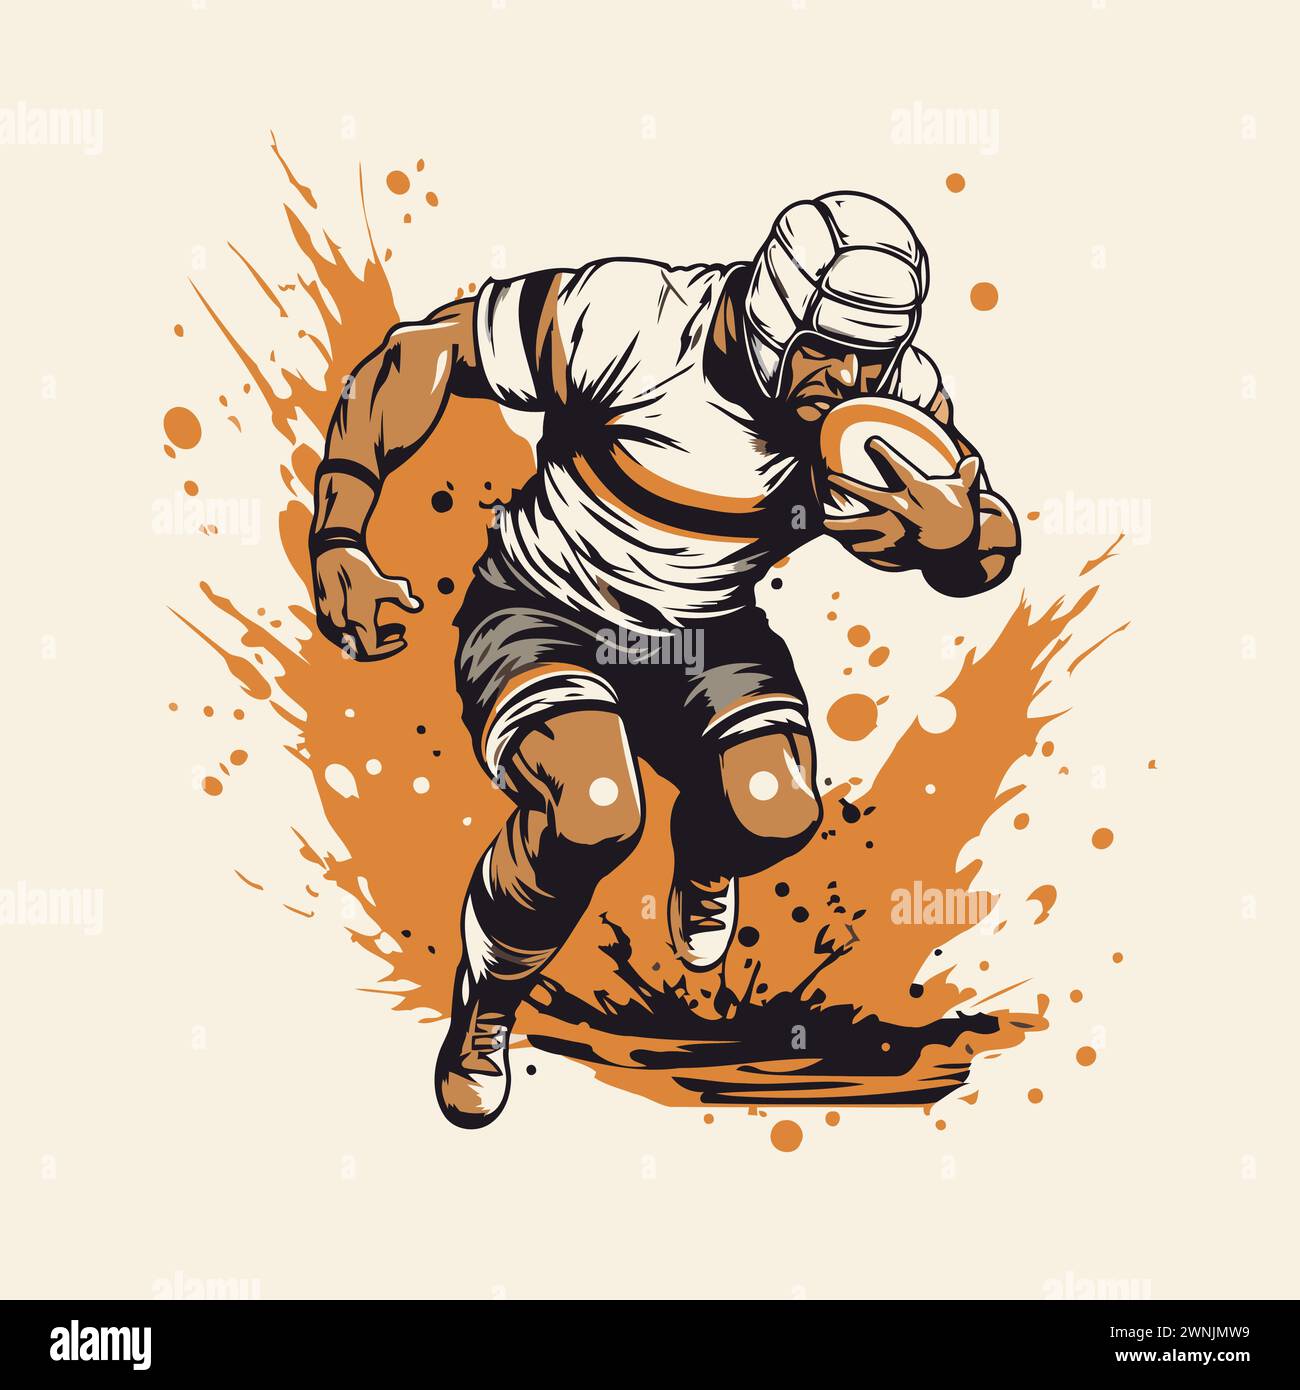 Rugby player with ball. vector illustration in vintage style. Stock Vector